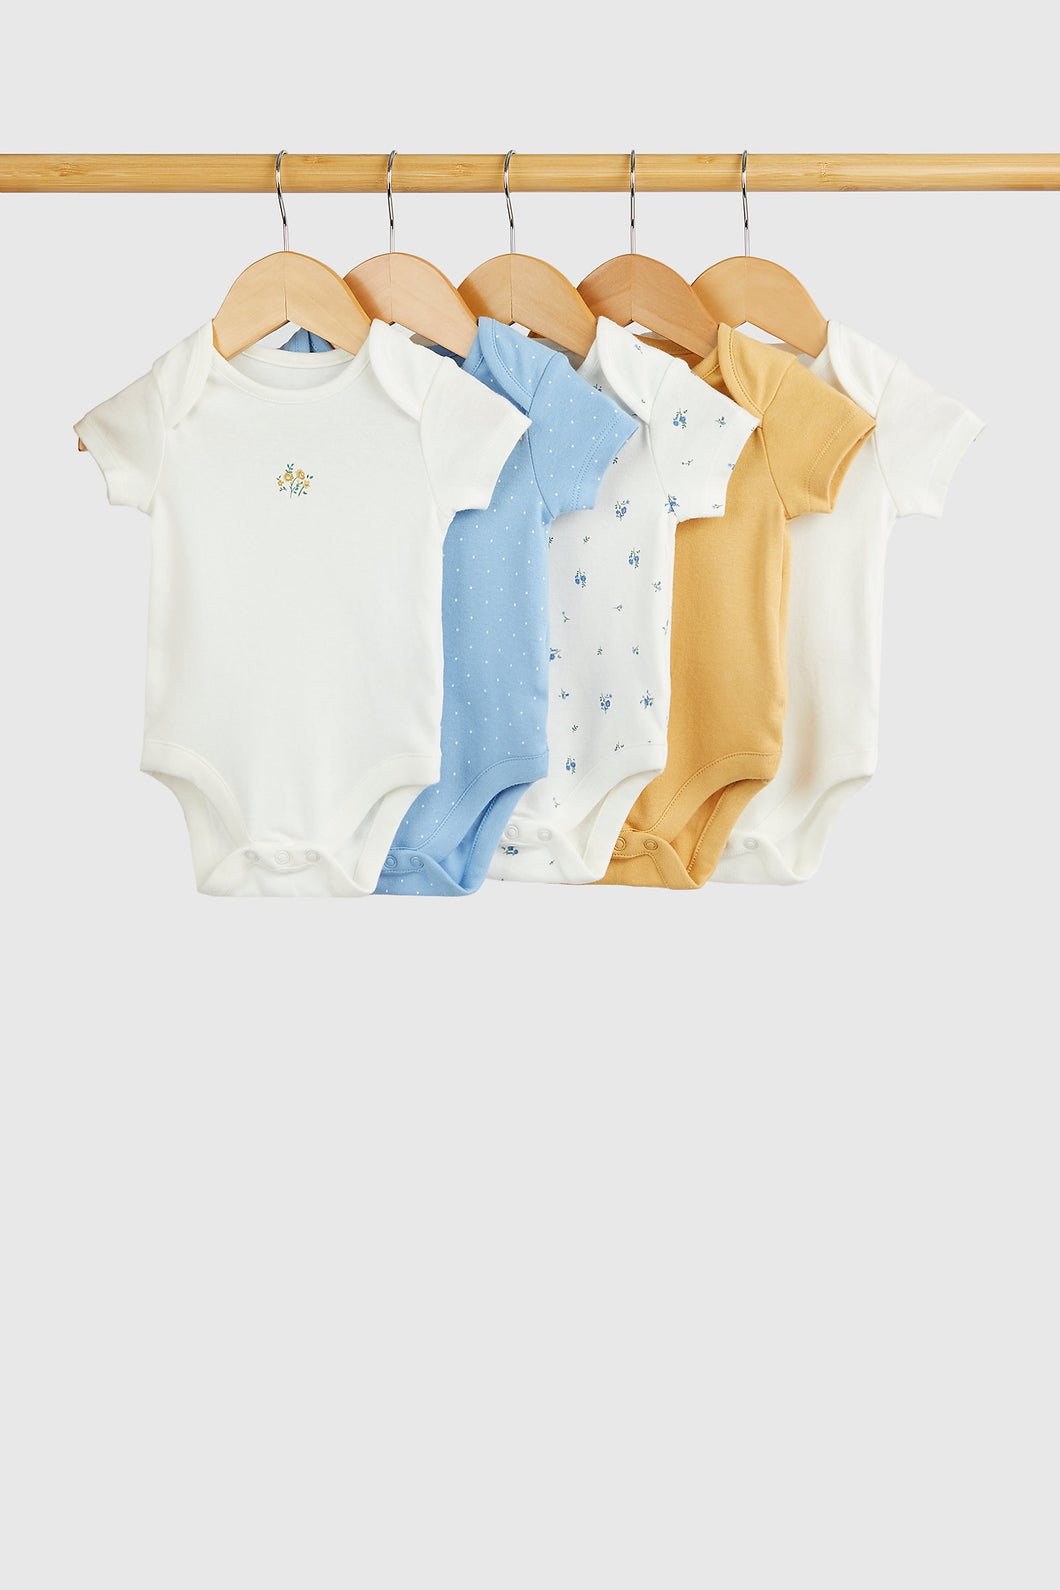 Mothercare Ditsy Floral Short-Sleeved Bodysuits - 5 Pack